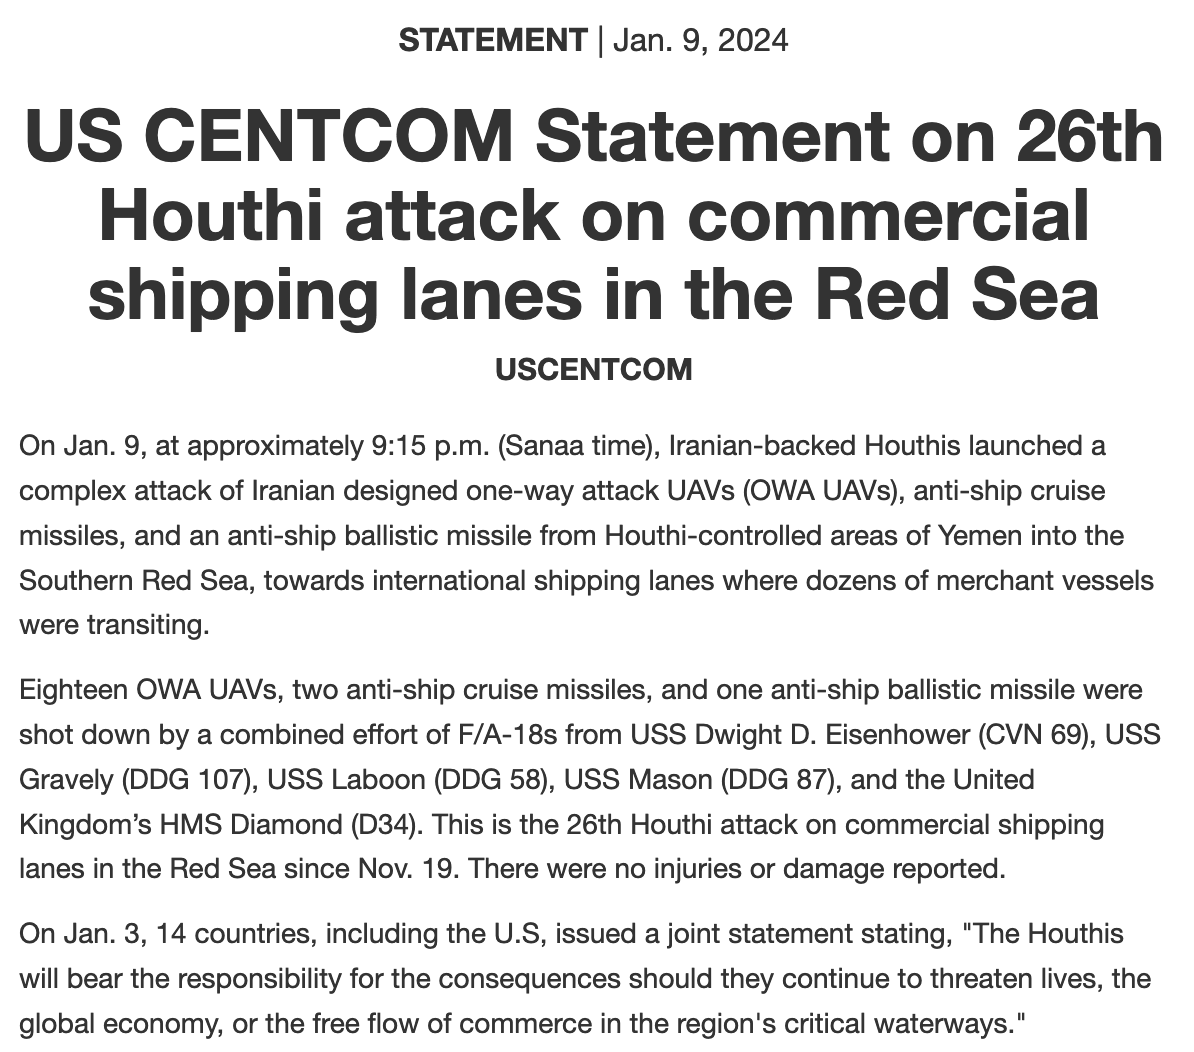 Iran-backed Houthis launch complex attack vs southern RedSea   Per @CENTCOM, the January 9 nighttime attack included: -18 1-way attack drones -2 cruise missiles -1 ballistic missile  US ships, F/A-18s & a UK ship shot them down  This is the 26th Houthi attack since Nov